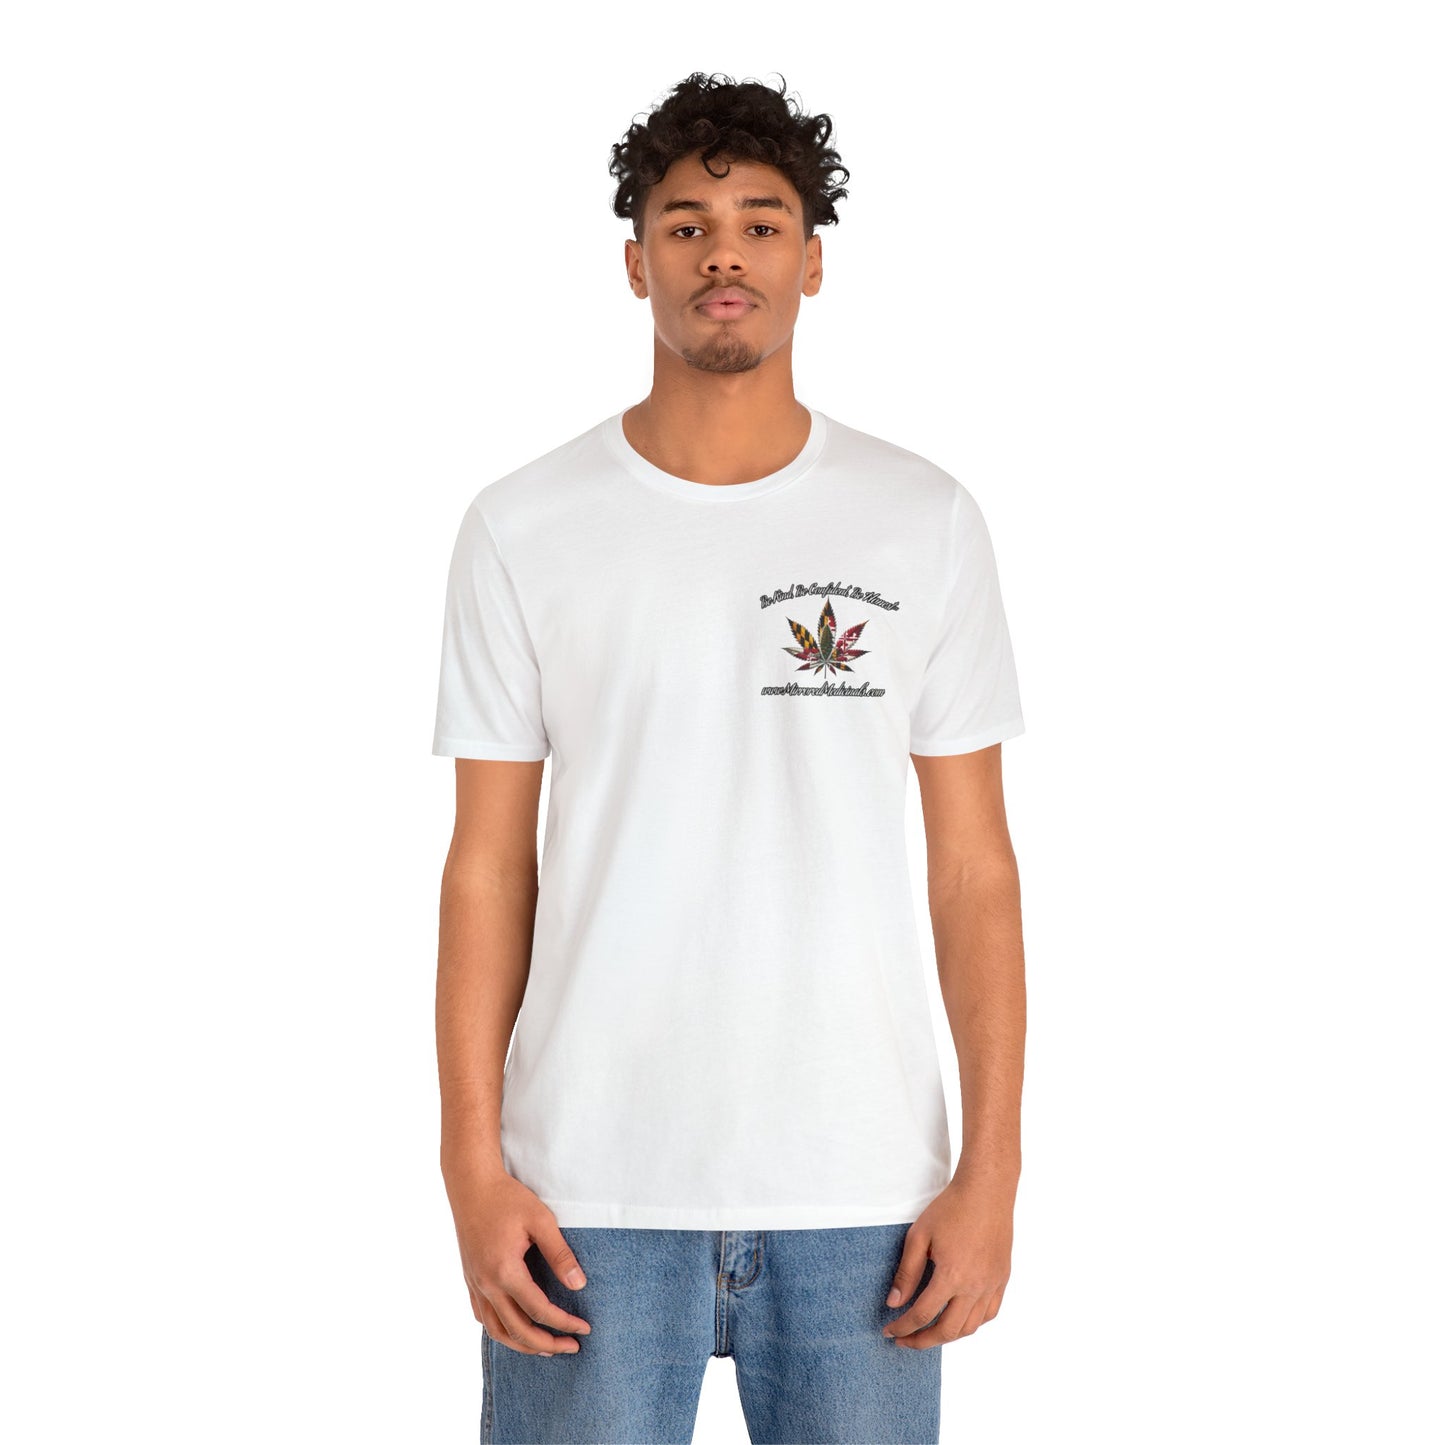 Chit Chat 2 - Unisex Jersey Short Sleeve Tee